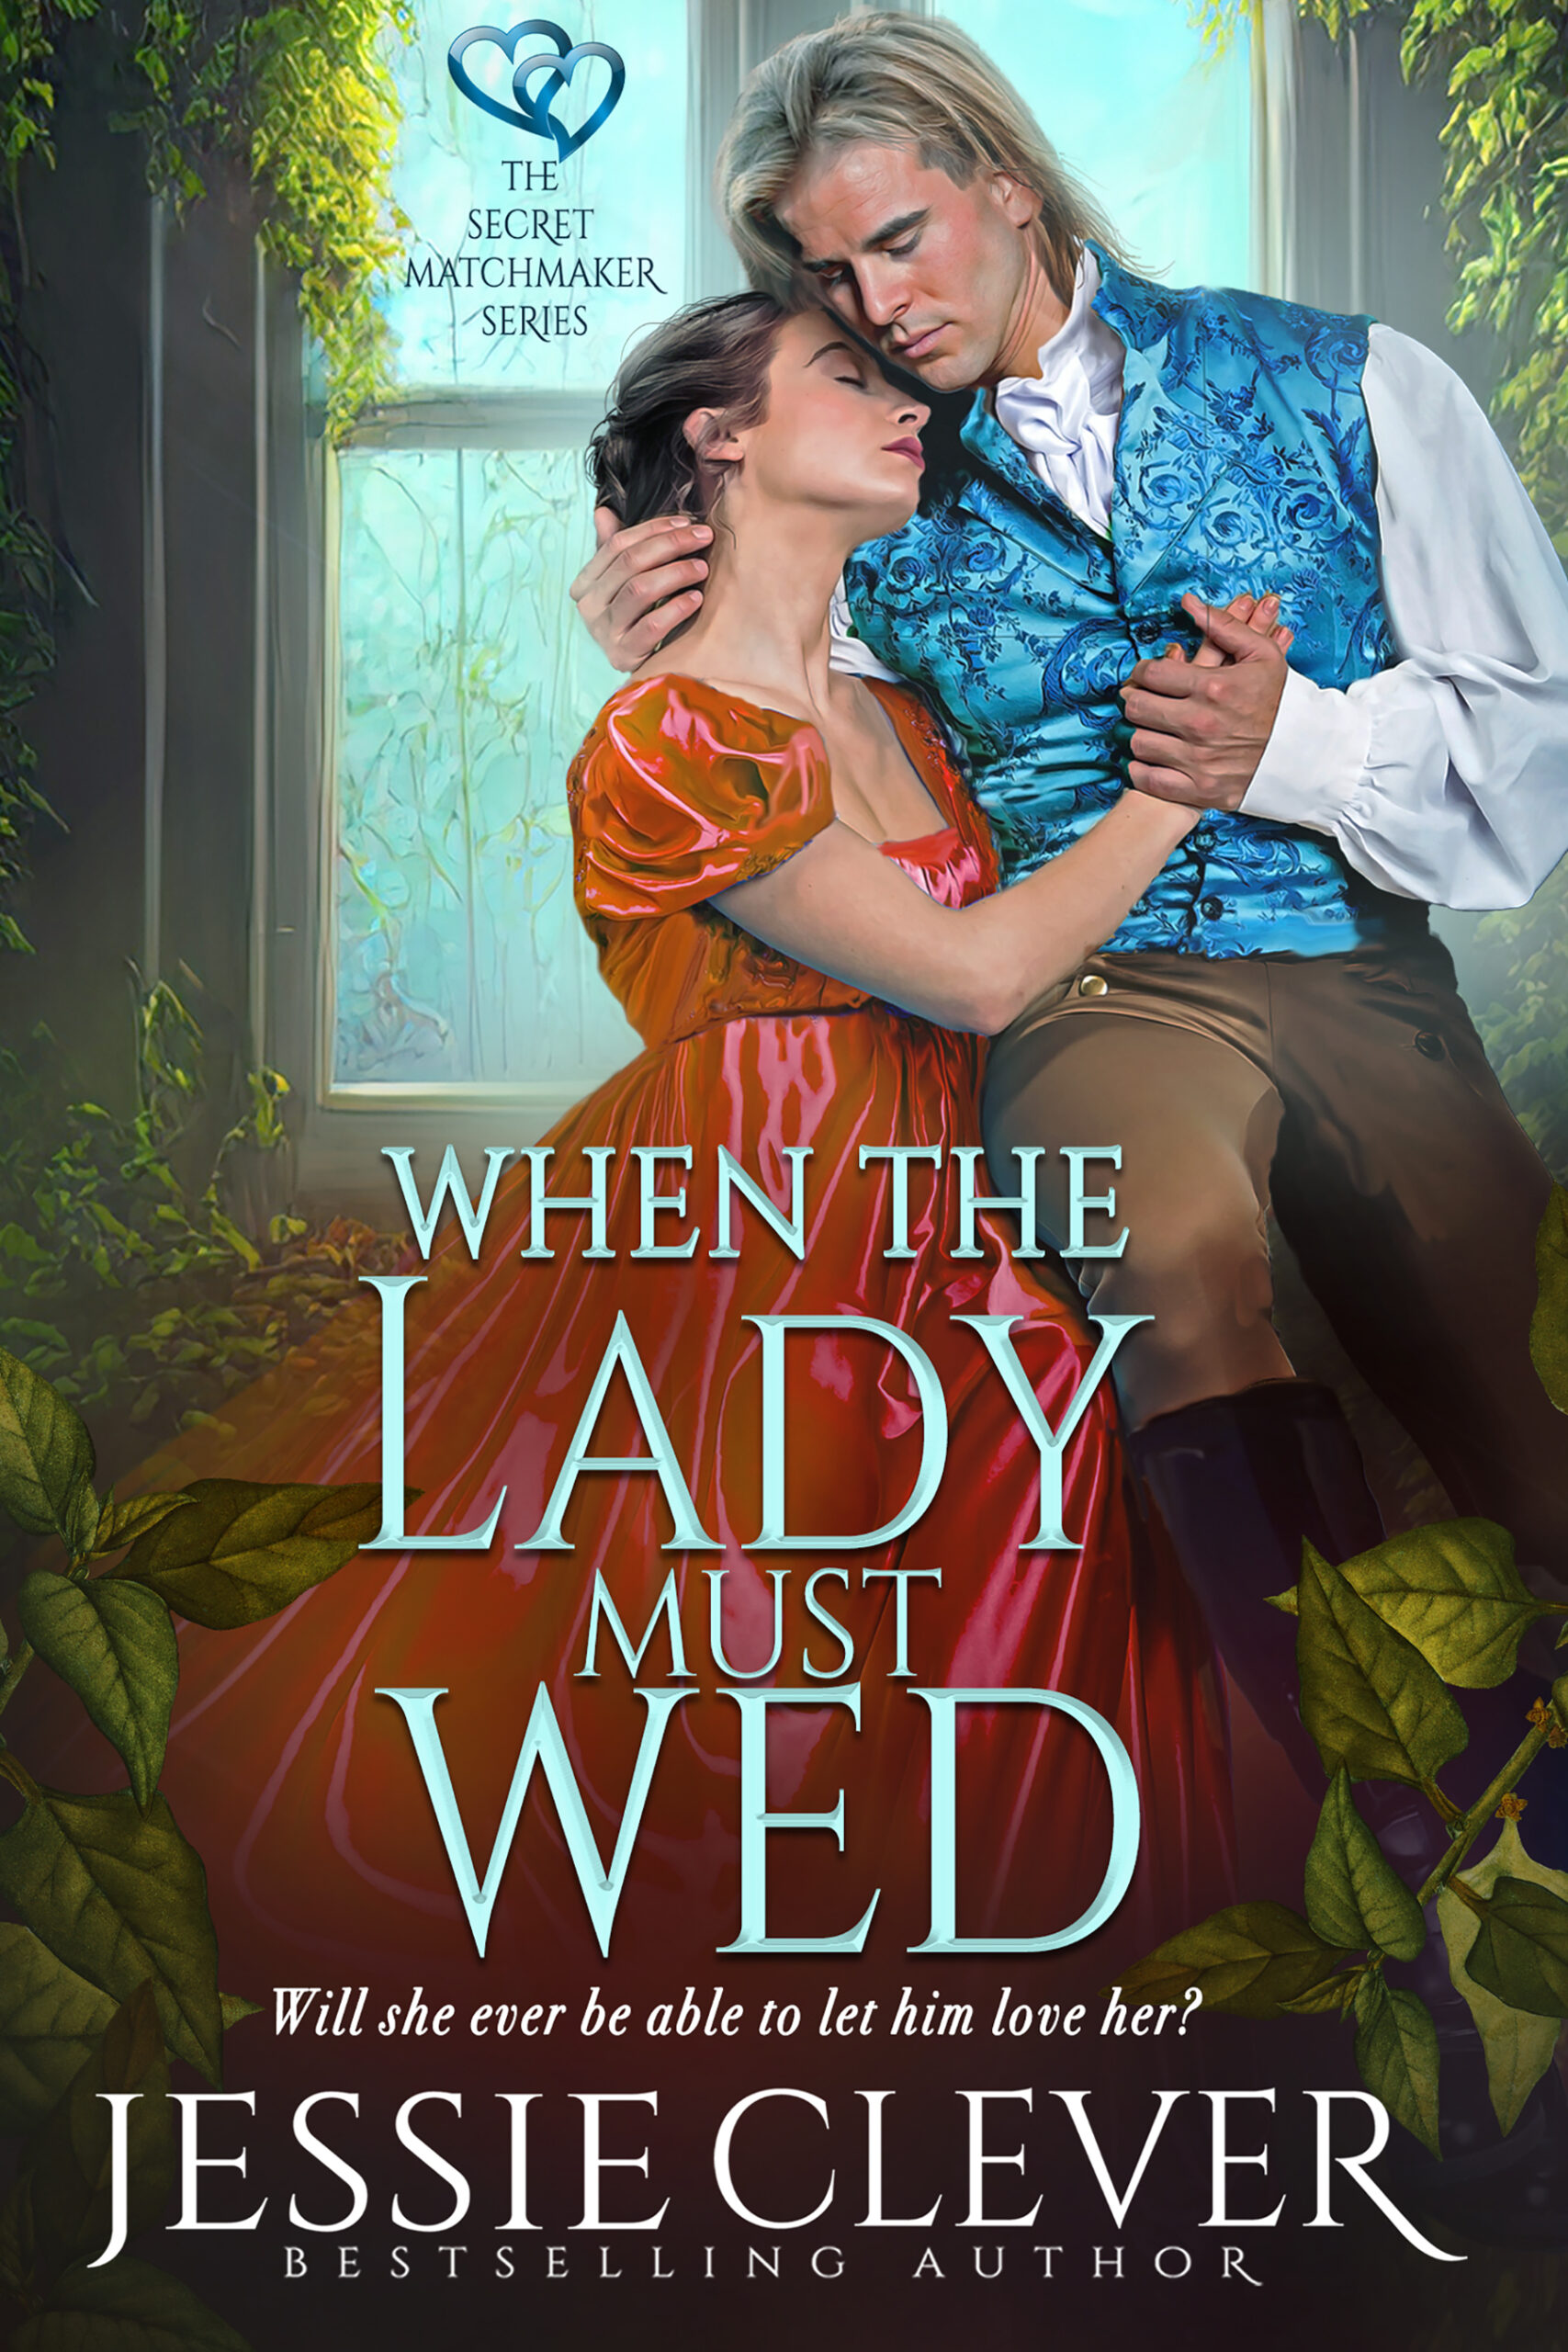 When the Lady Must Wed book cover